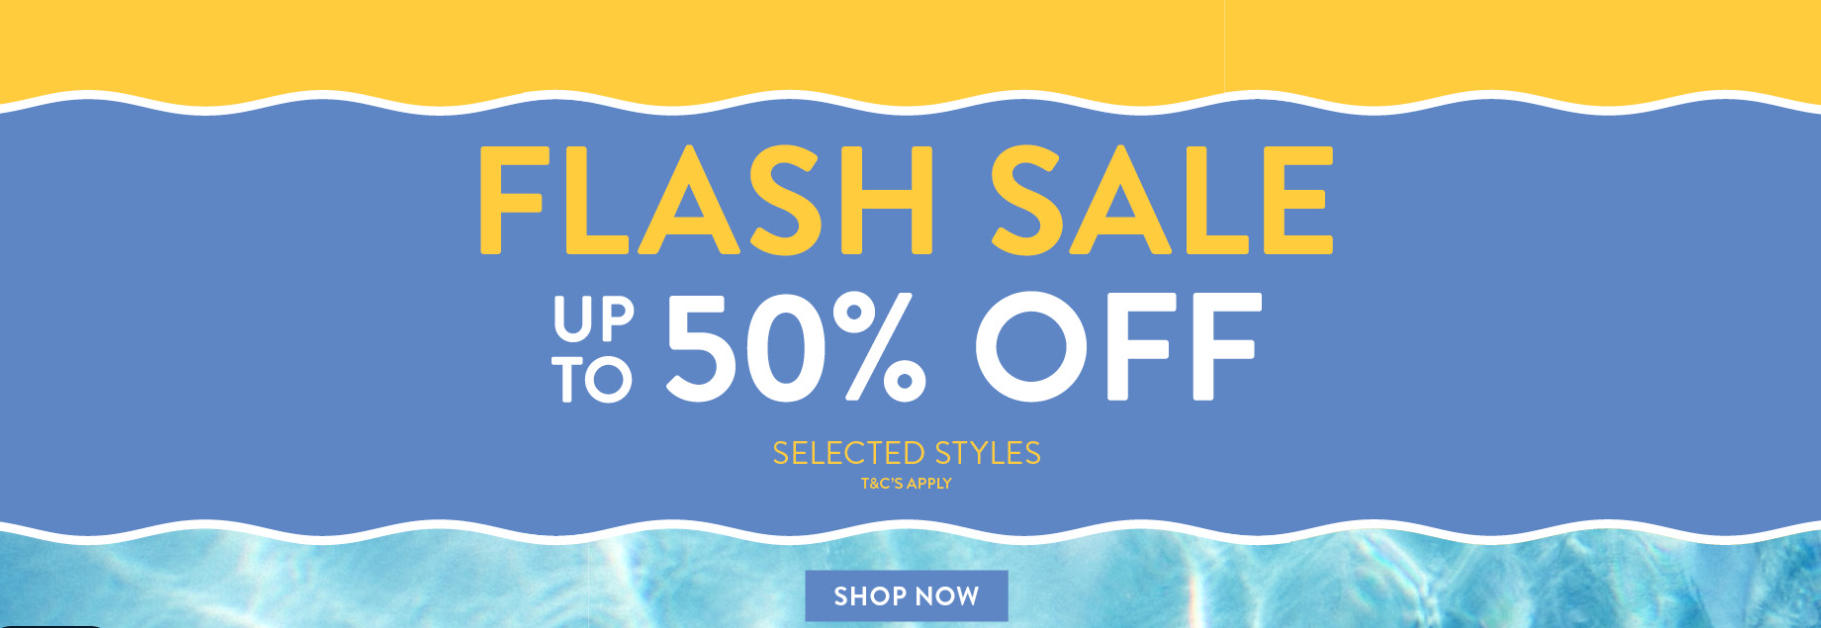 Sperry Flash sale up to 50% OFF on selected styles including sandals, sneakers, boat shoes & more